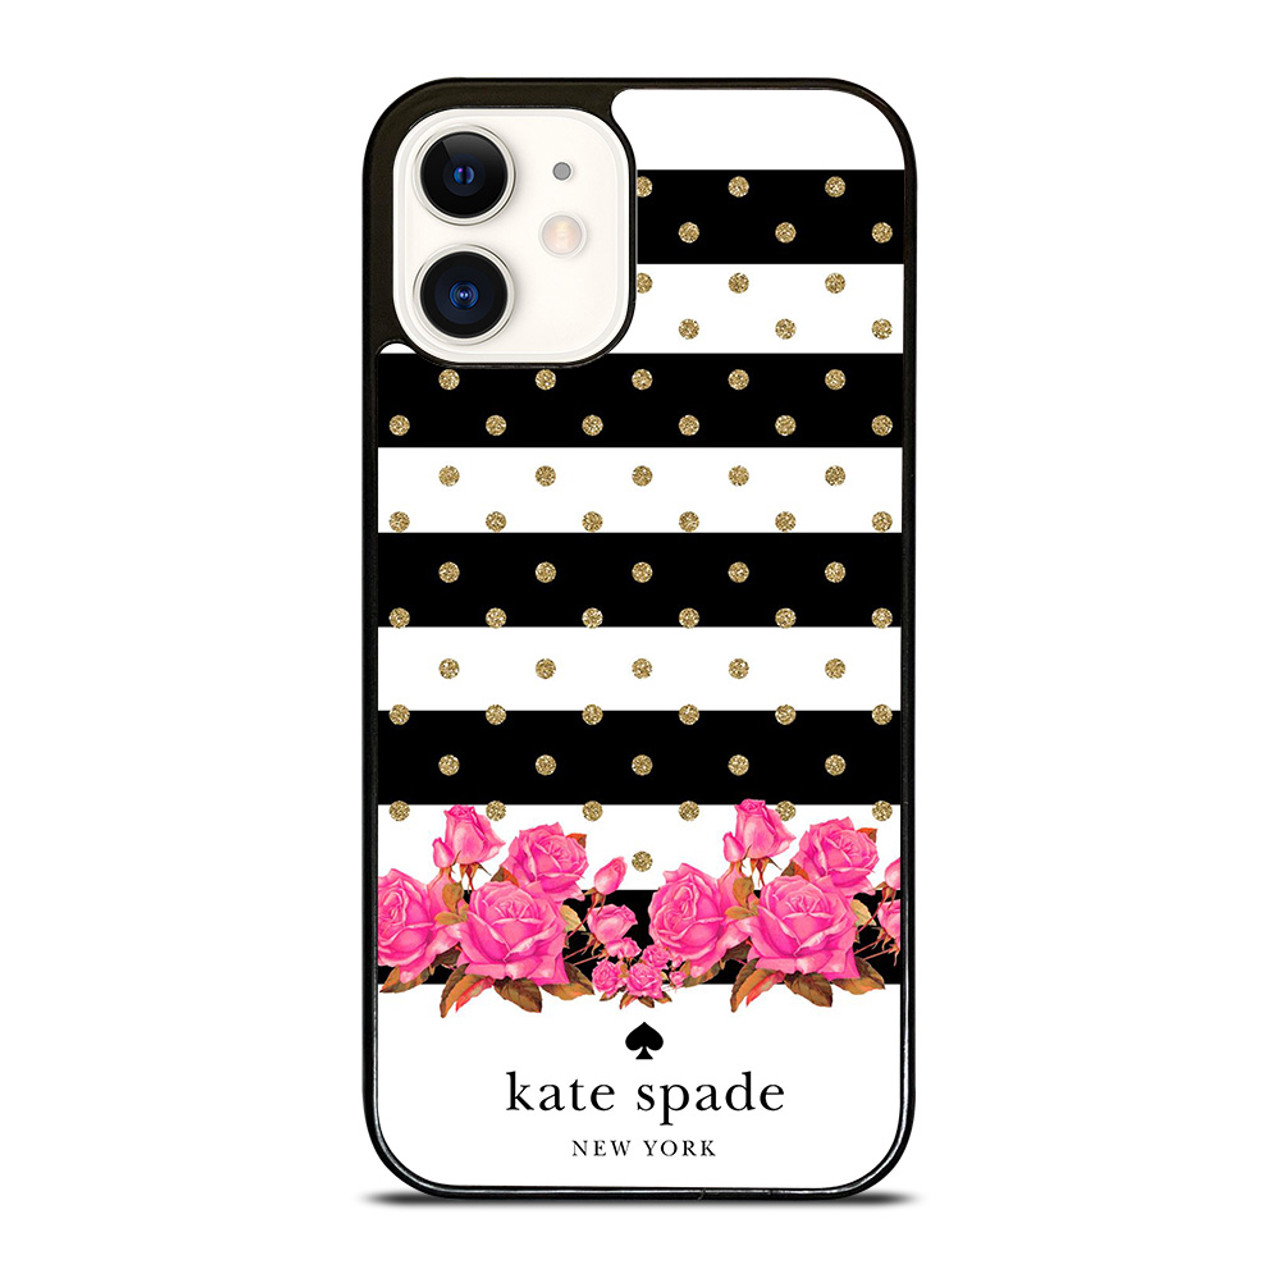 KATE SPADE NEW YORK FLORAL POLKADOTS iPhone 12 Case Cover